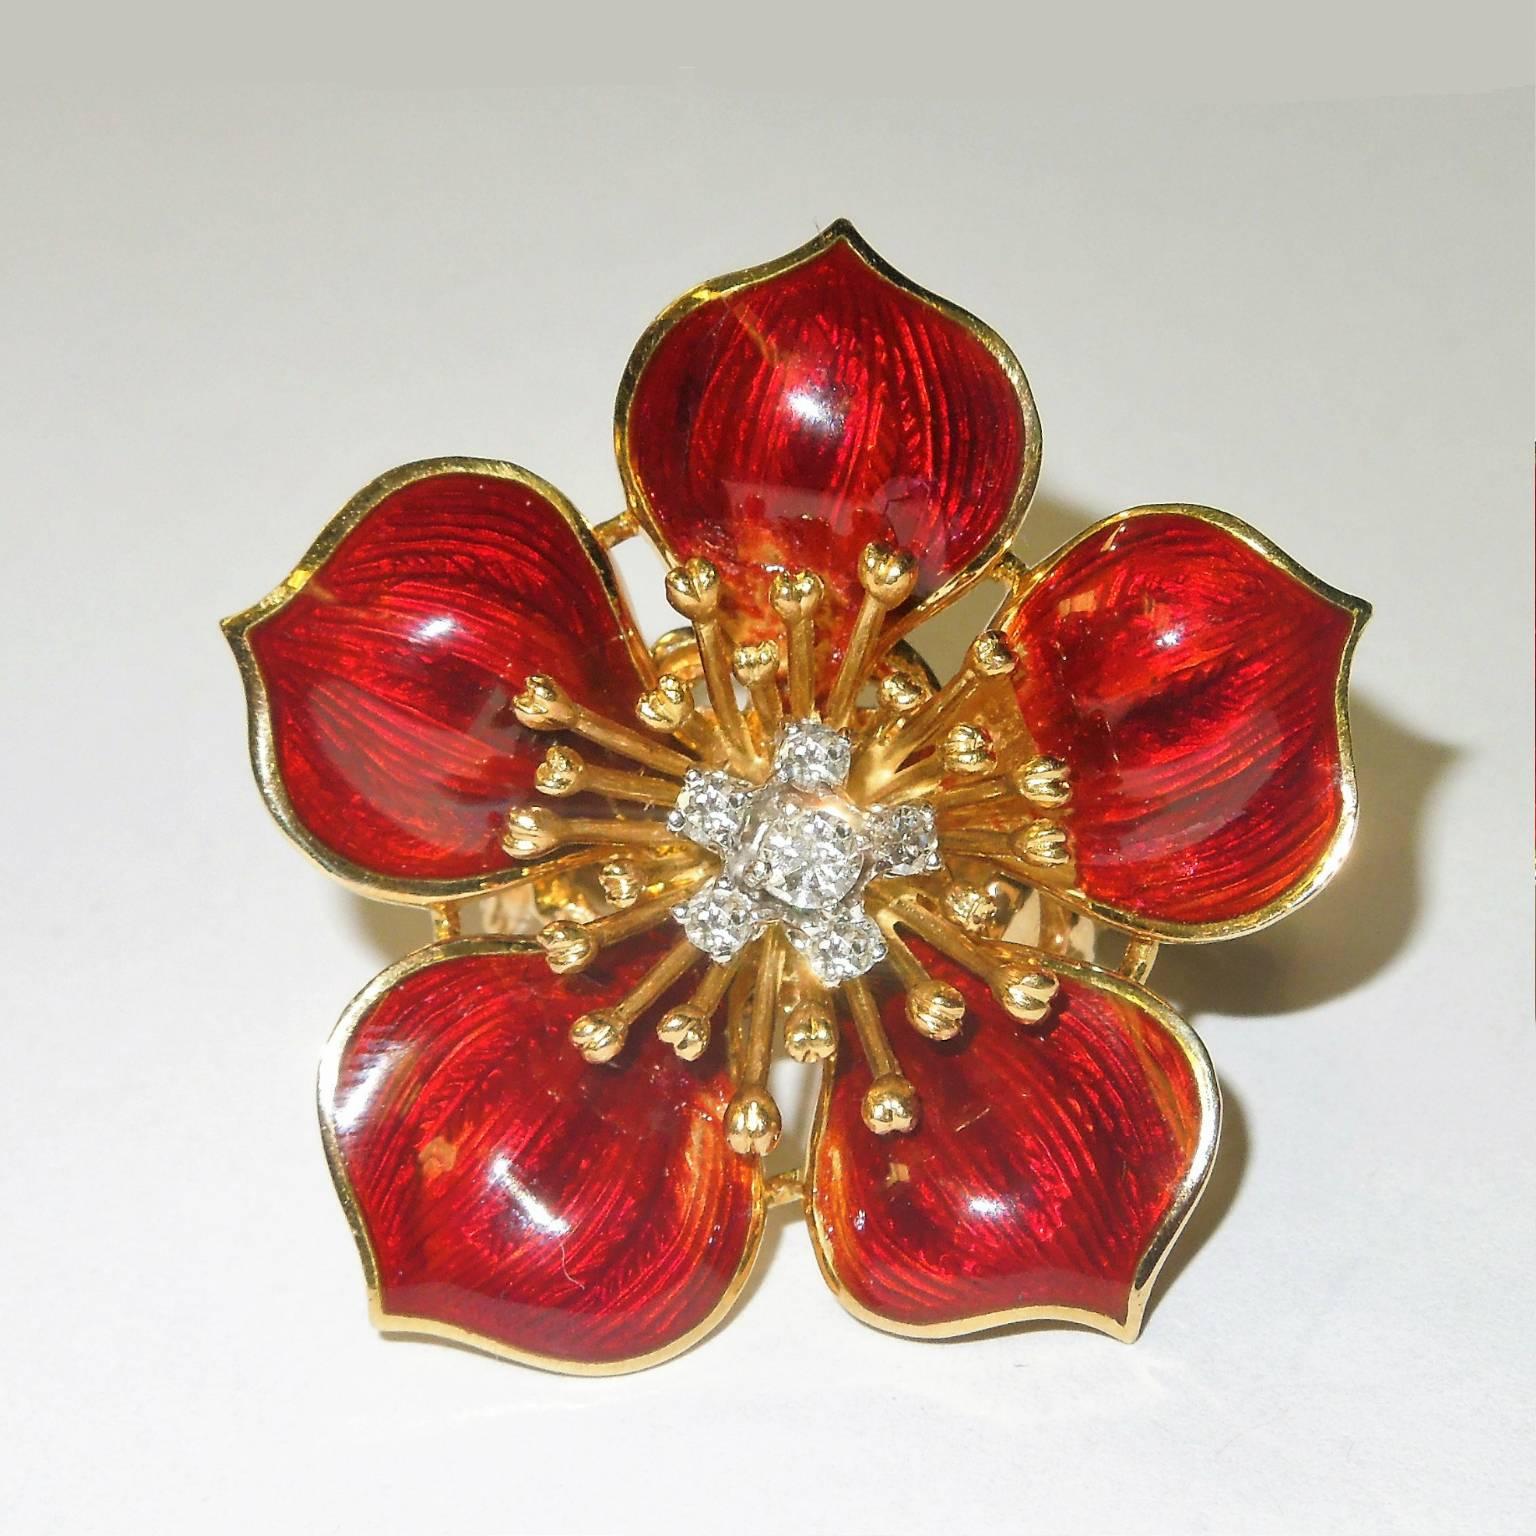 18K Gold Flower Ring with Diamonds and Red Enamel

Apprx. 0.25ct. Diamonds
 
19.75 grams of 18k gold

Leaves of flower have red enamel.

Face has 1.3 inches length

Currently size 6 but sizable

Estate